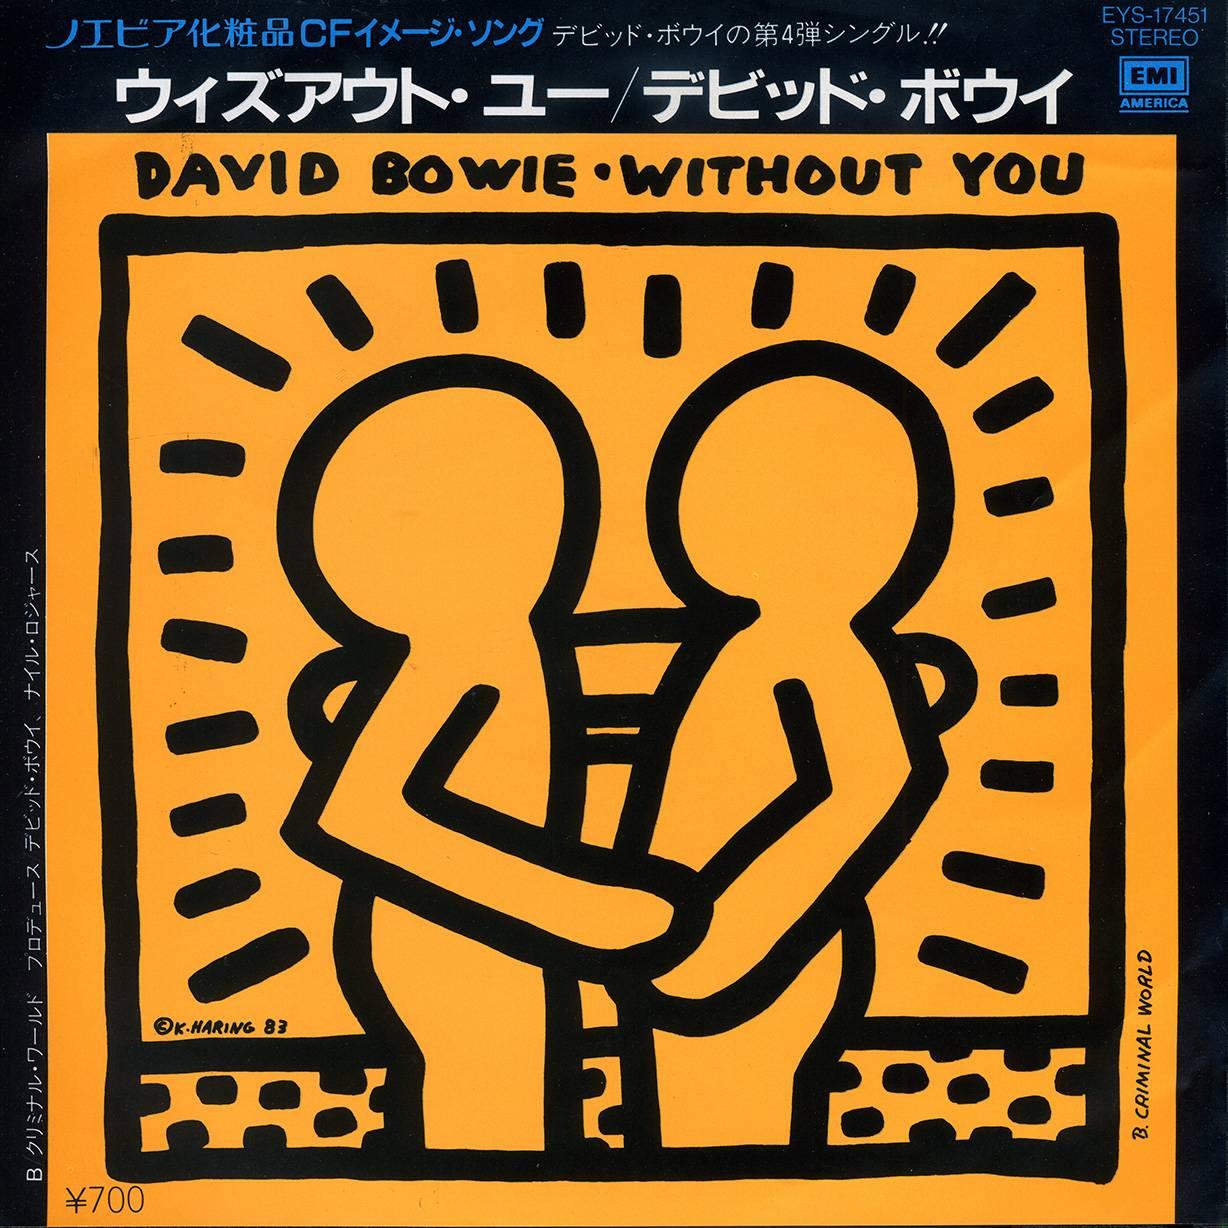 David BOWIE &quot;Without You&quot; A Rare Highly Sought After Vinyl Art Cover featuring Original Artwork by Keith Haring

Year: 1983

Medium: Off-Set Lithograph

Dimensions: 7 x 7 inches

Plate signed on lower left &amp; dated 1983 by